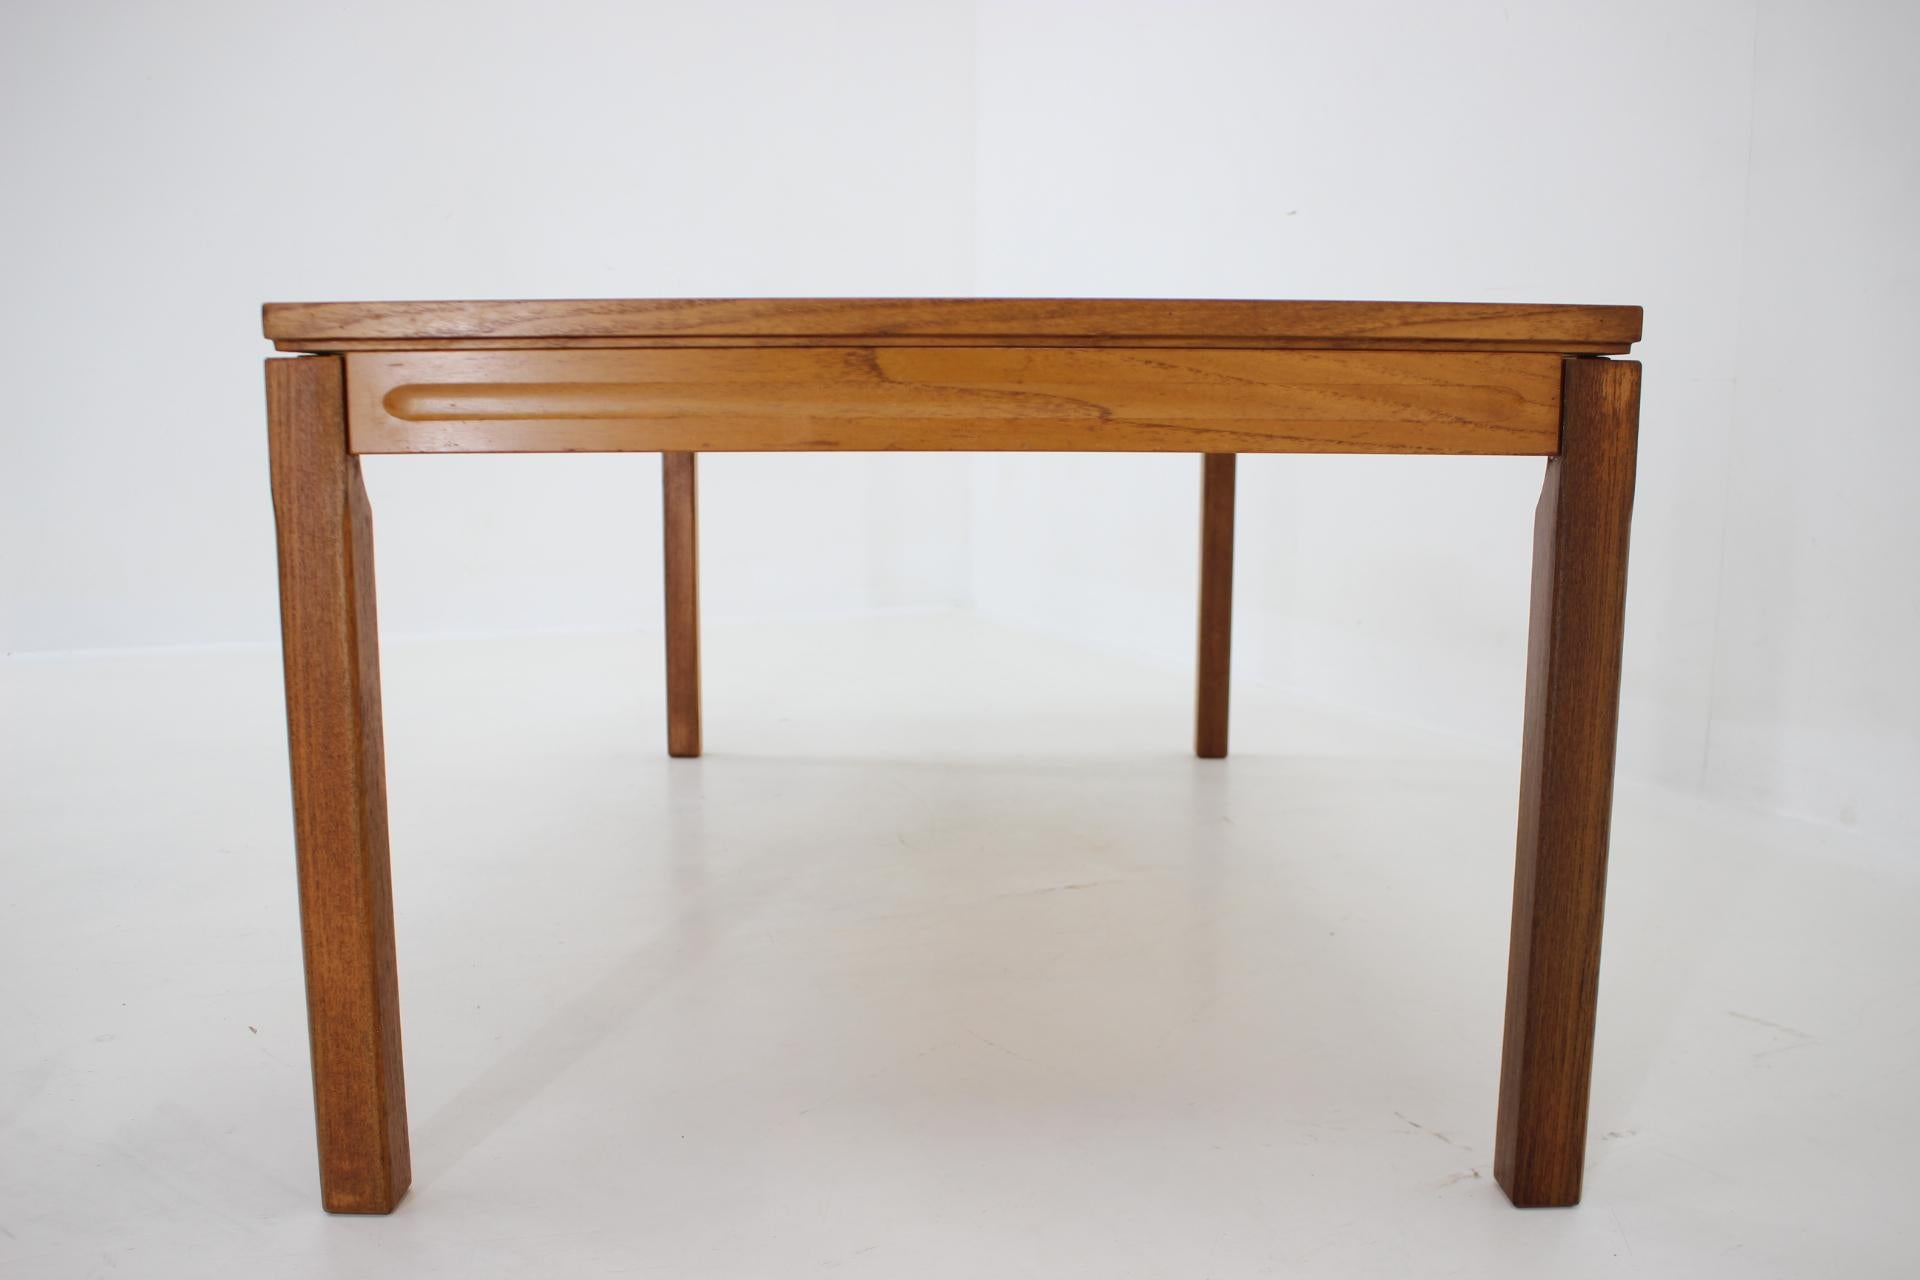 1960s Palisander and Tile Coffee Table, Denmark In Good Condition For Sale In Praha, CZ